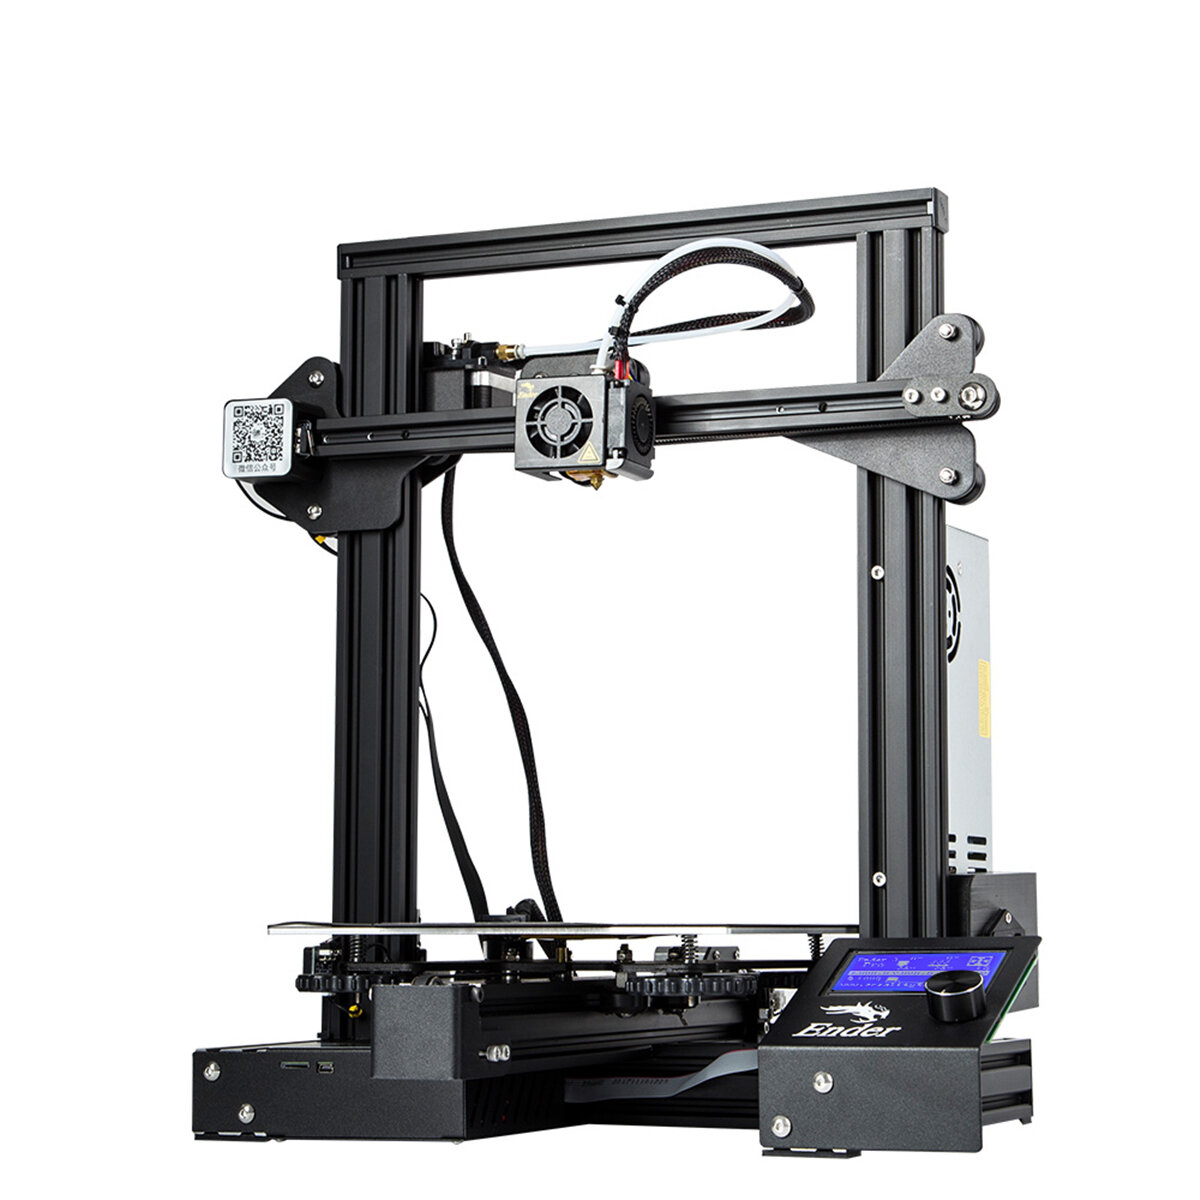 Creality 3D® Ender-3 Pro DIY 3D Printer Kit 220x220x250mm Printing Size With Magnetic Removable Platform Sticker/Power R